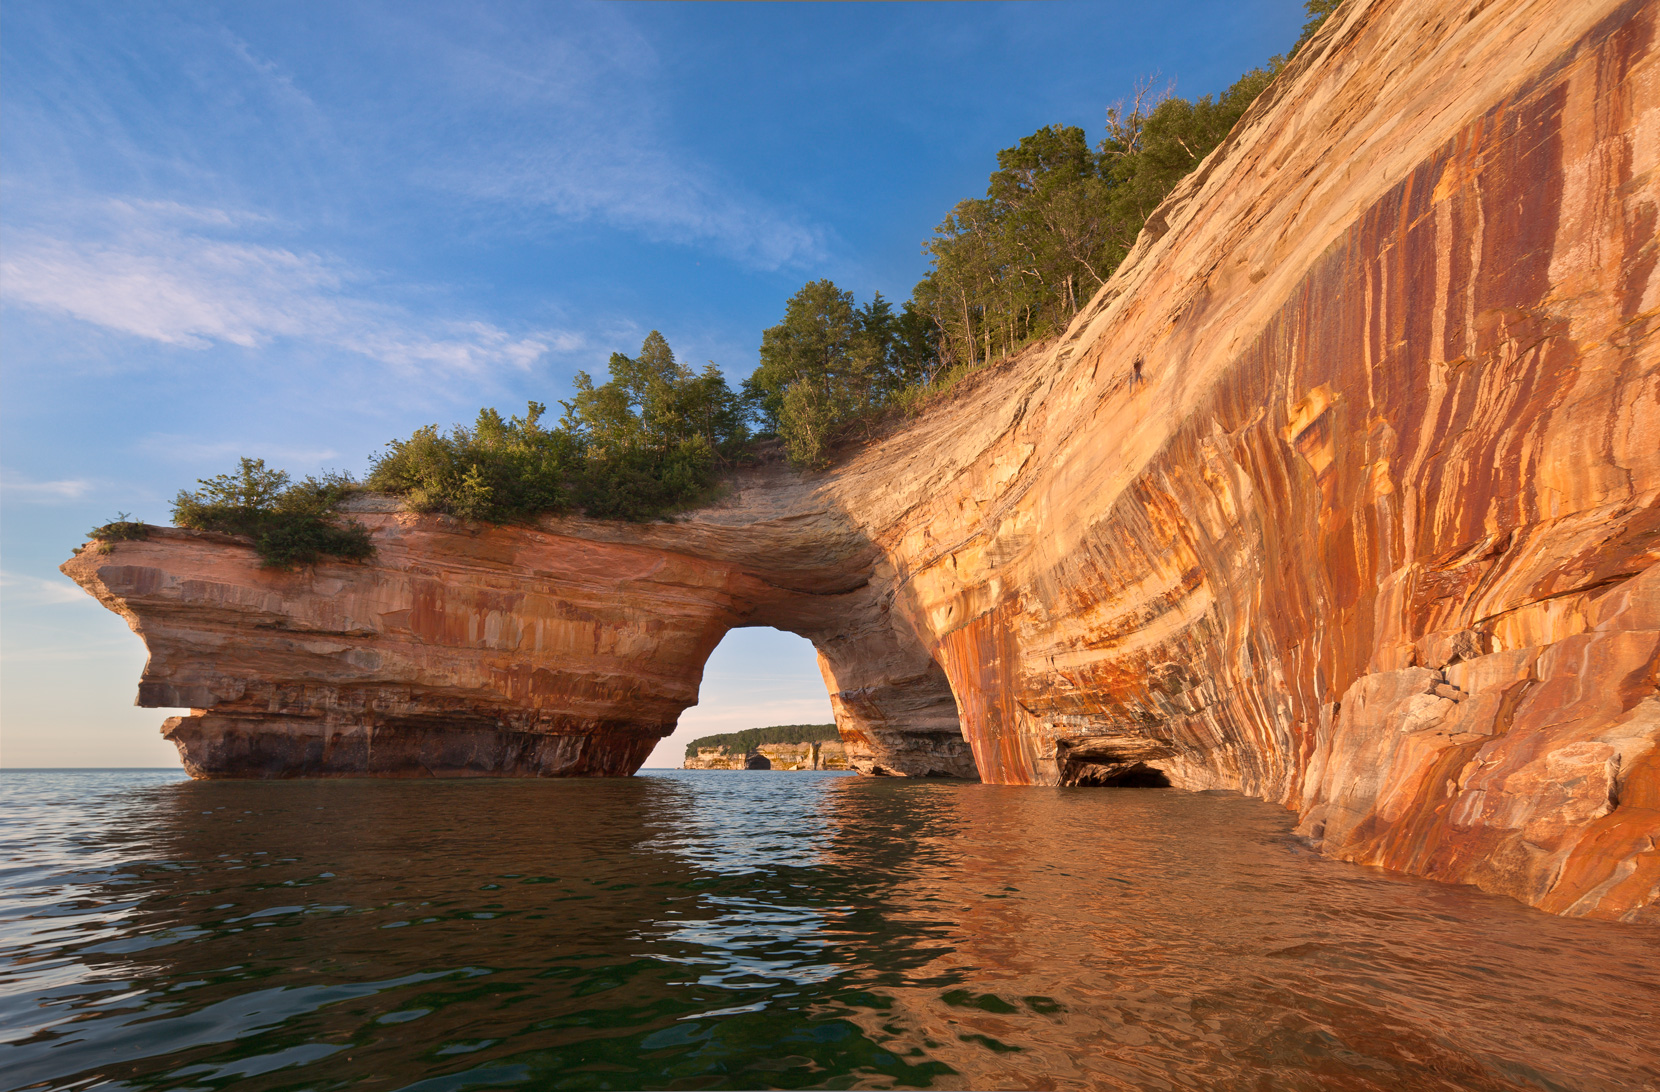 View of stone arch over water at Pictured Rocks.